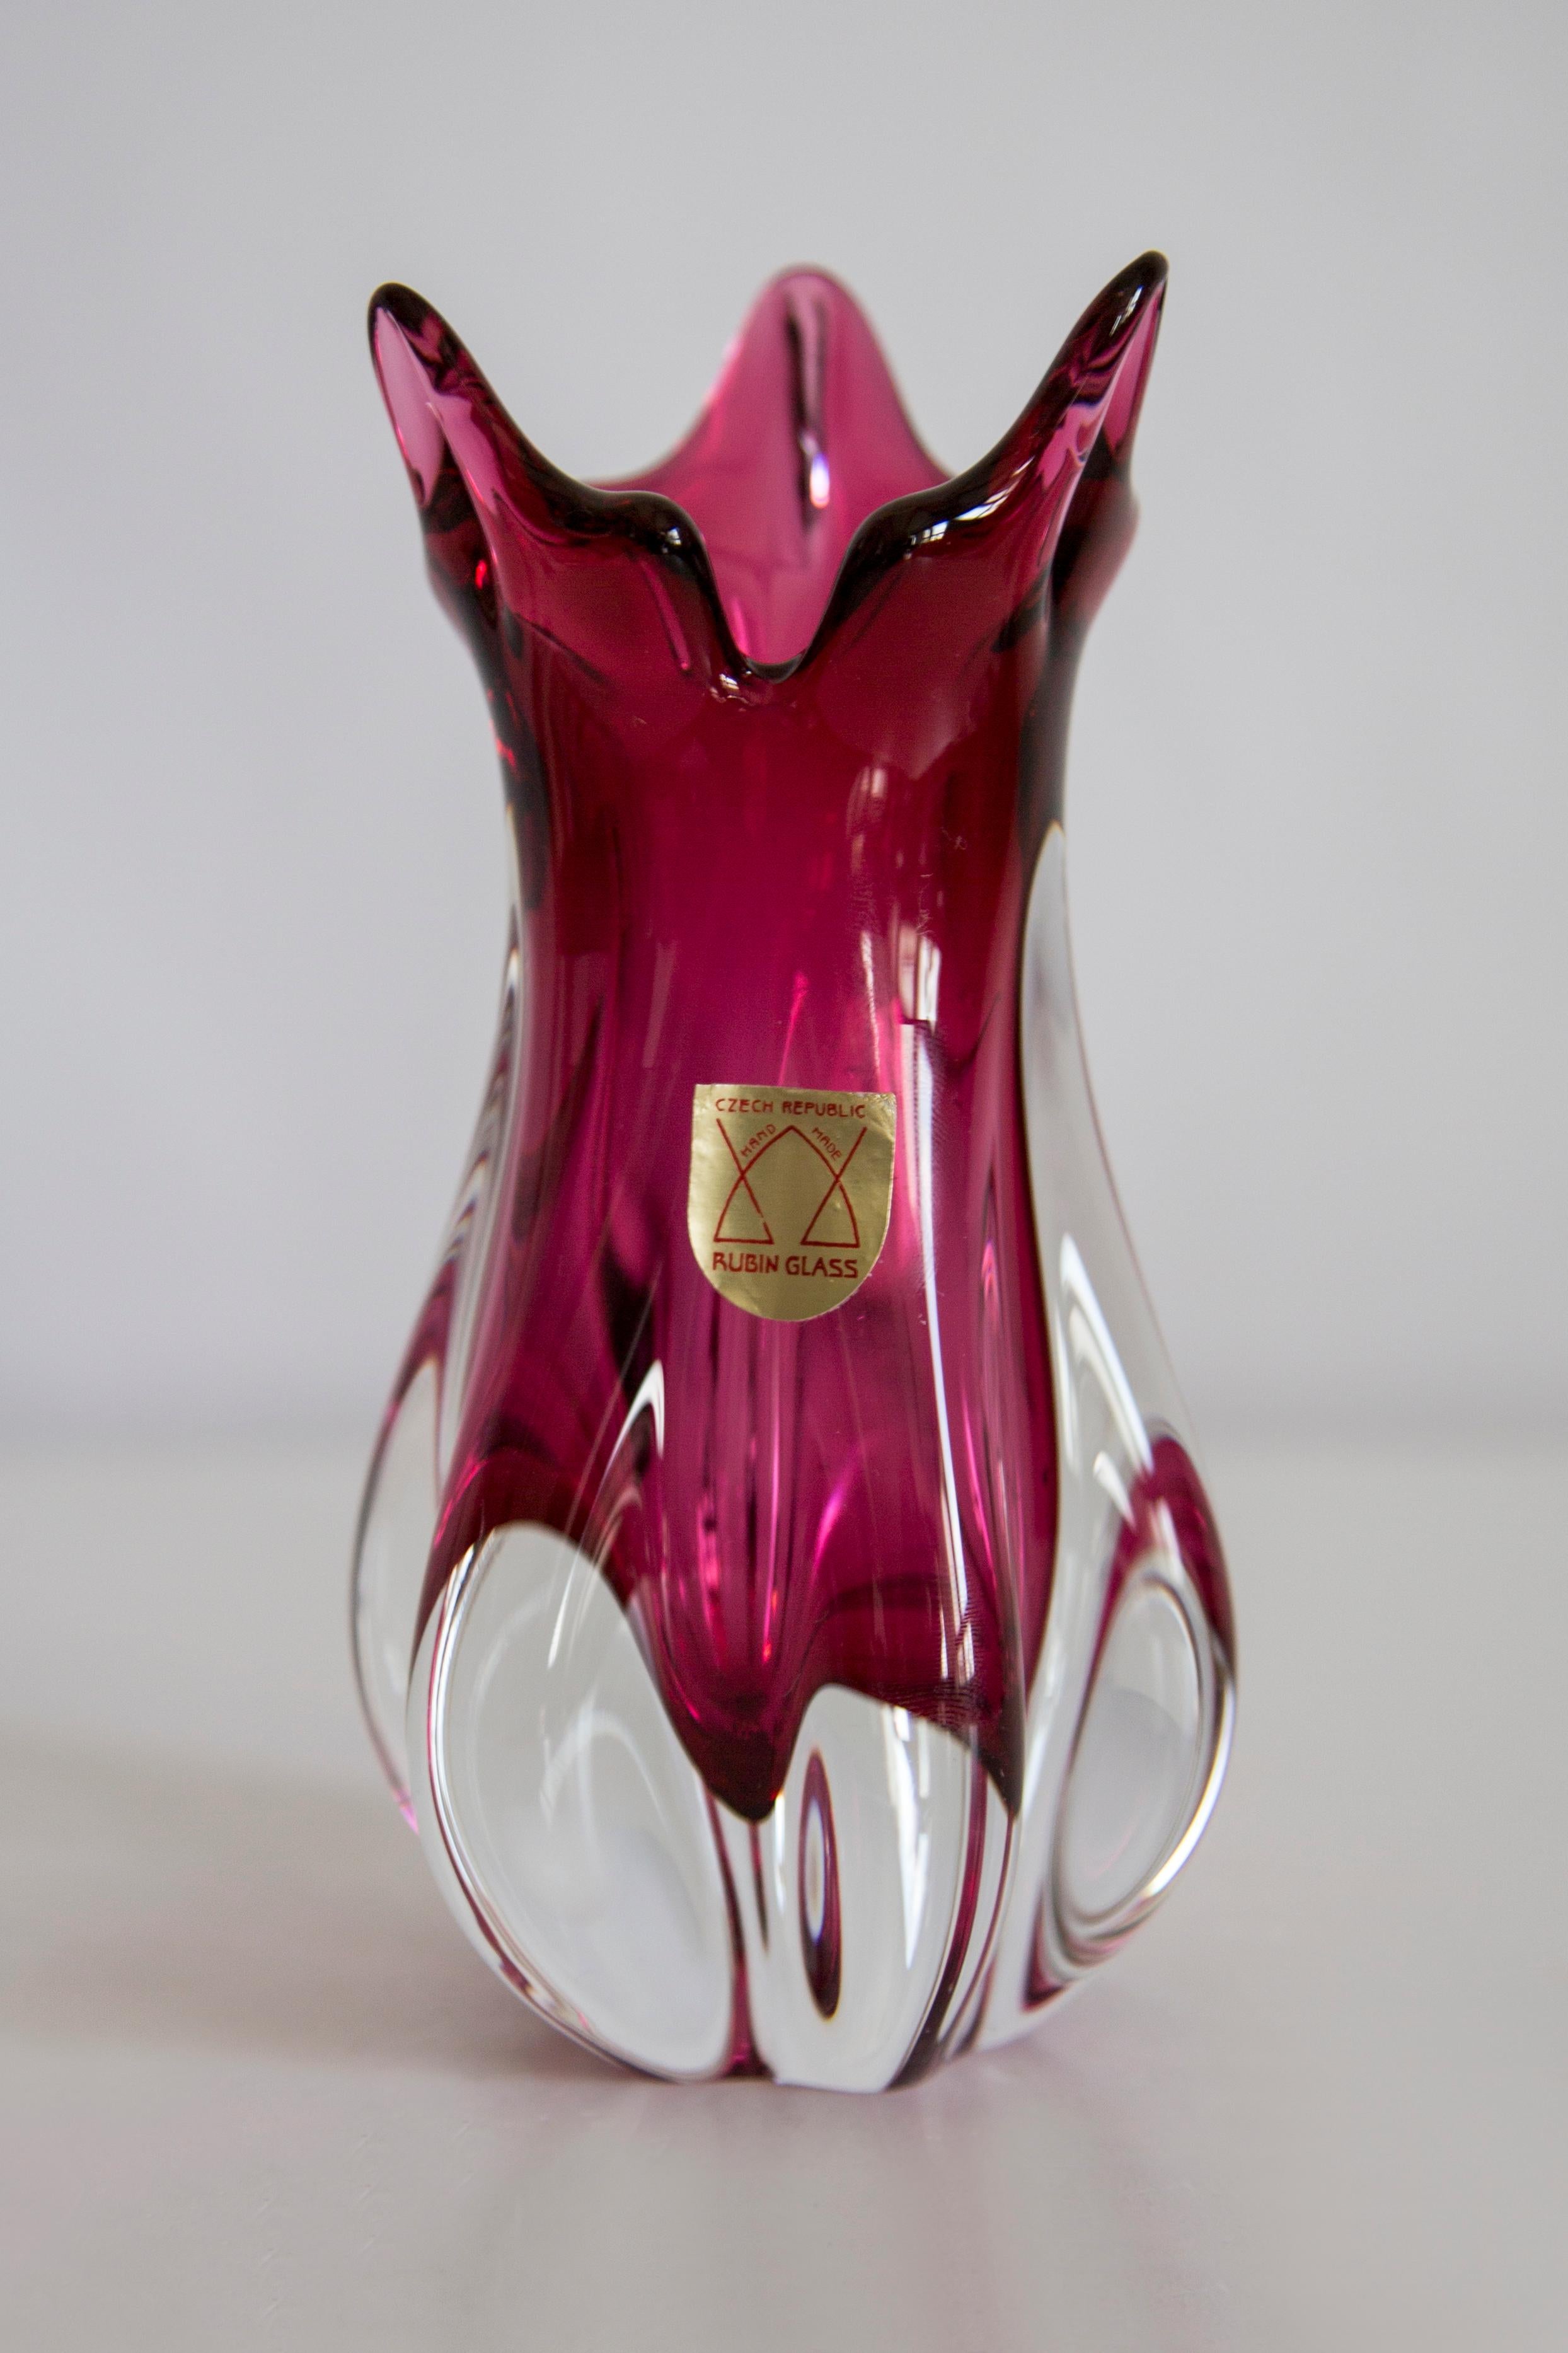 20th Century Mid Century Crystal Pink Glass Artistic Vase, Rubin Glass, Czech Republic, 1970s For Sale